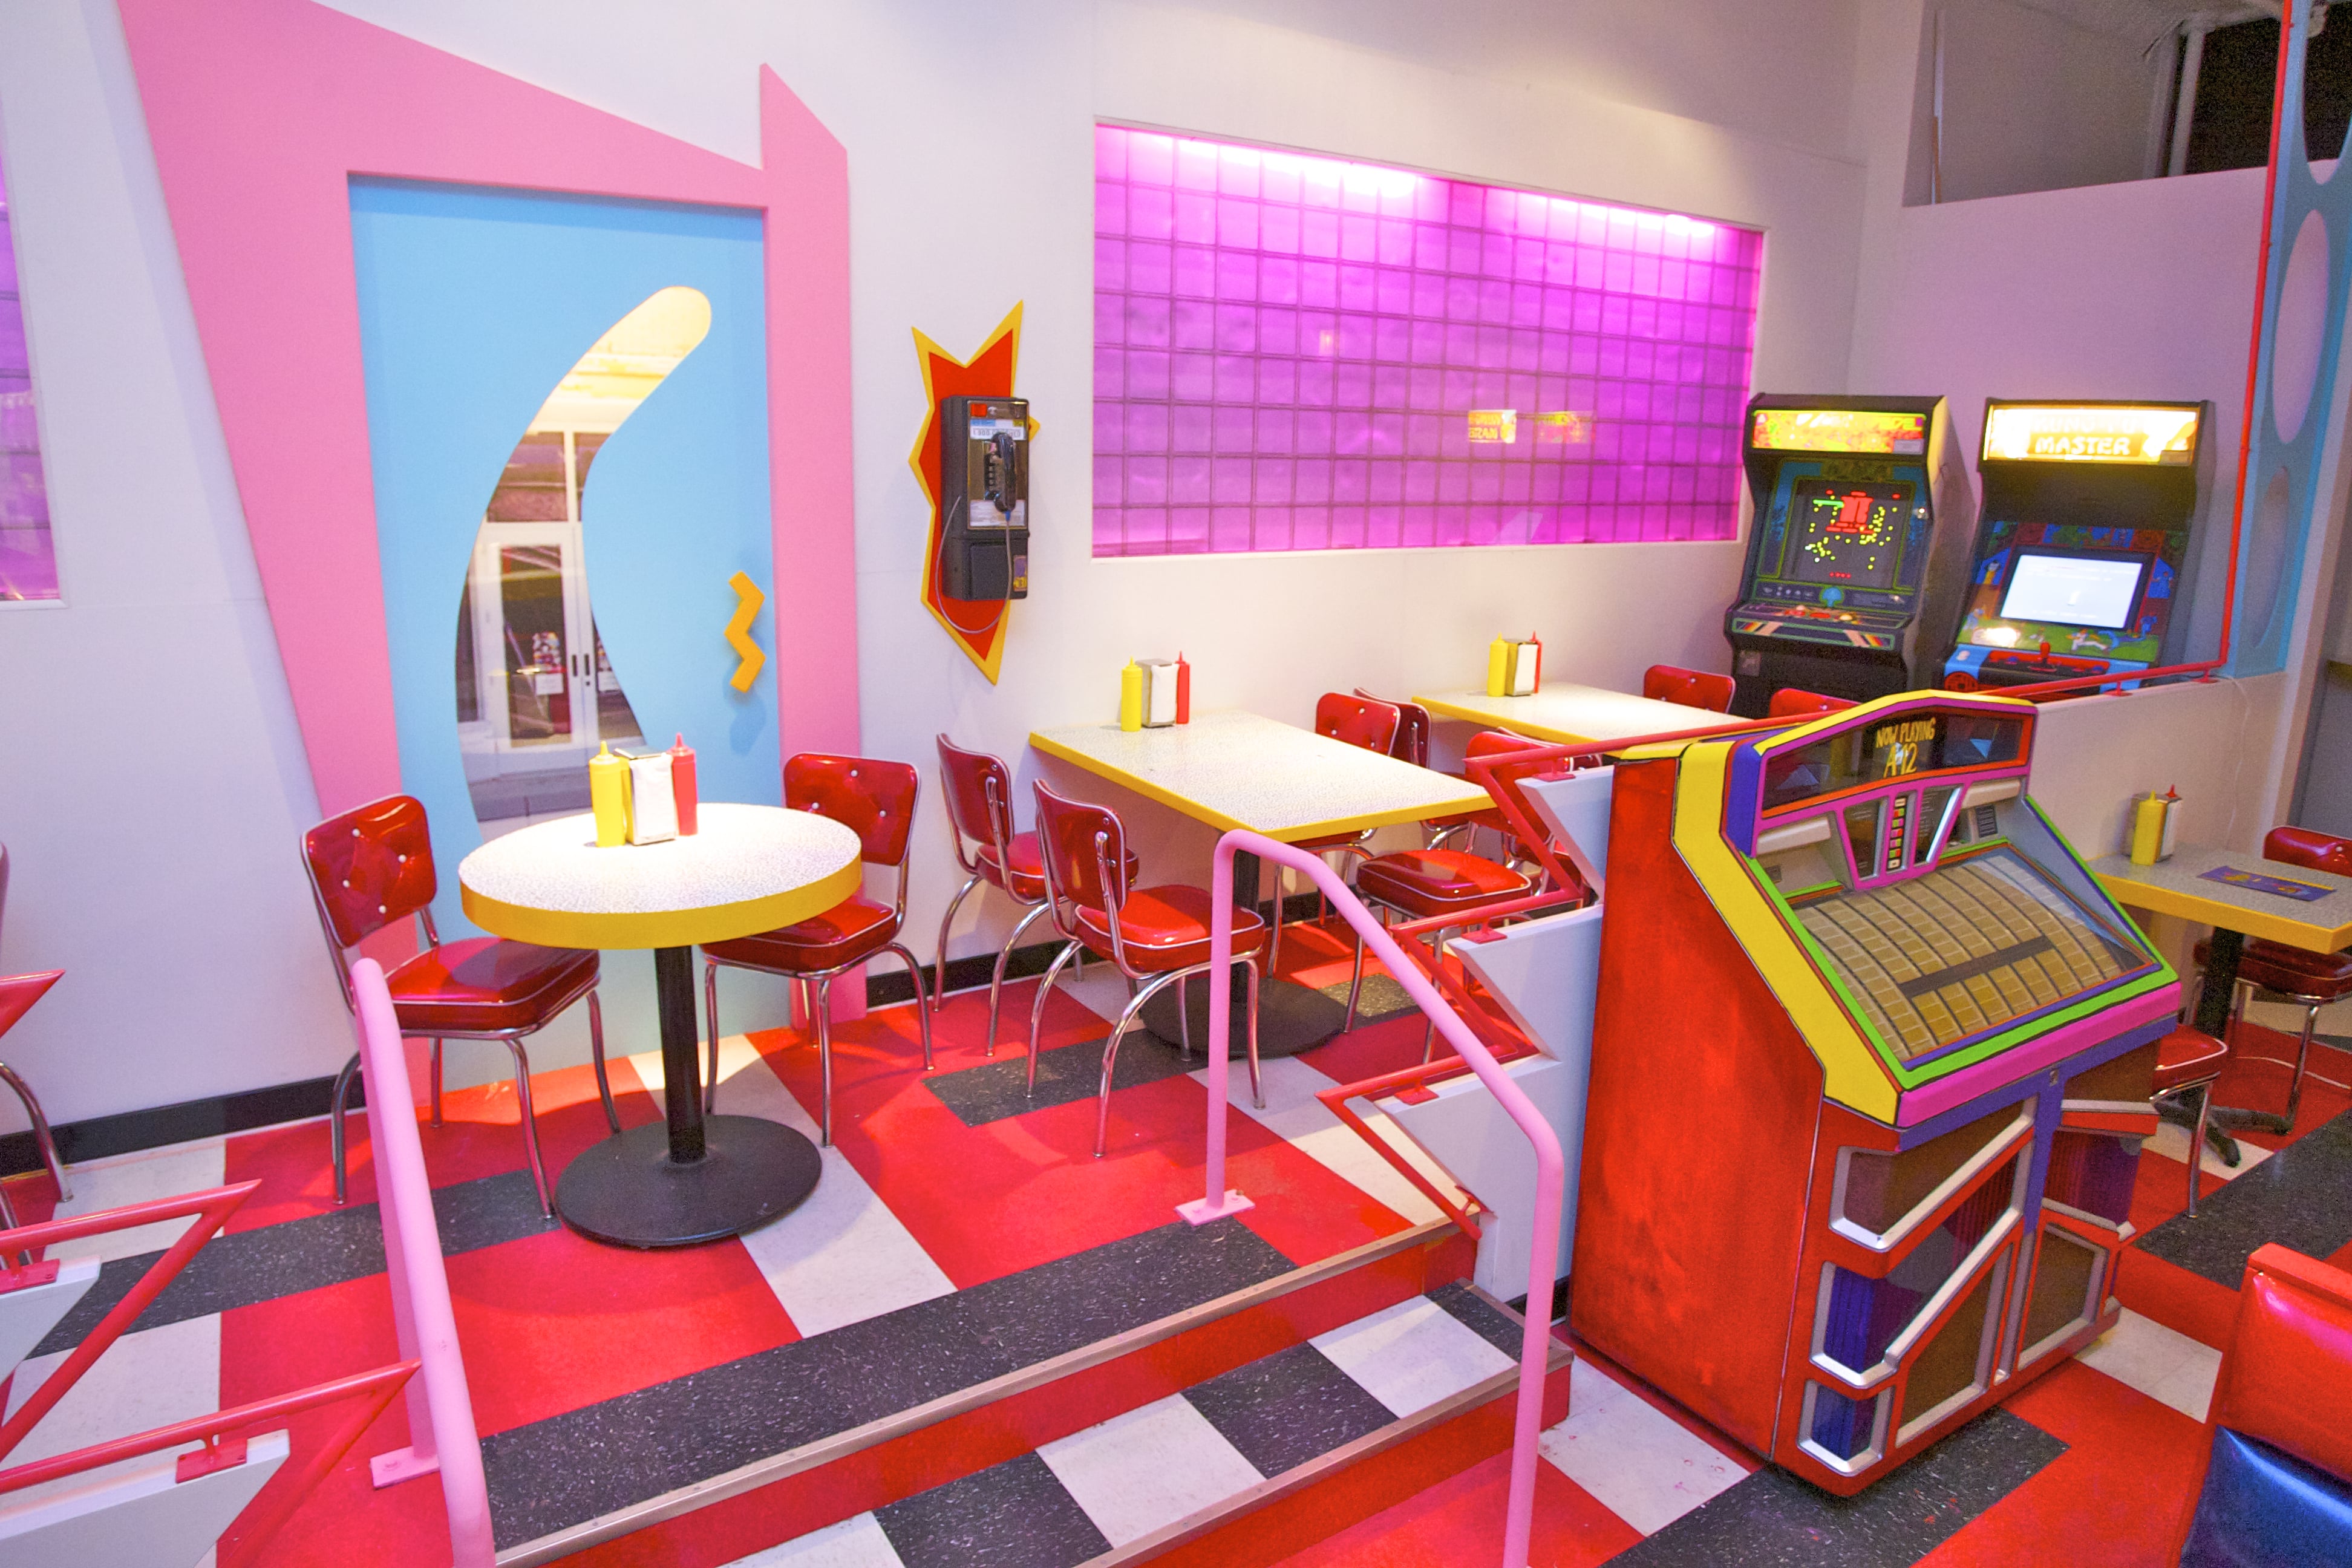 Saved by the Bell Themed Restaurant